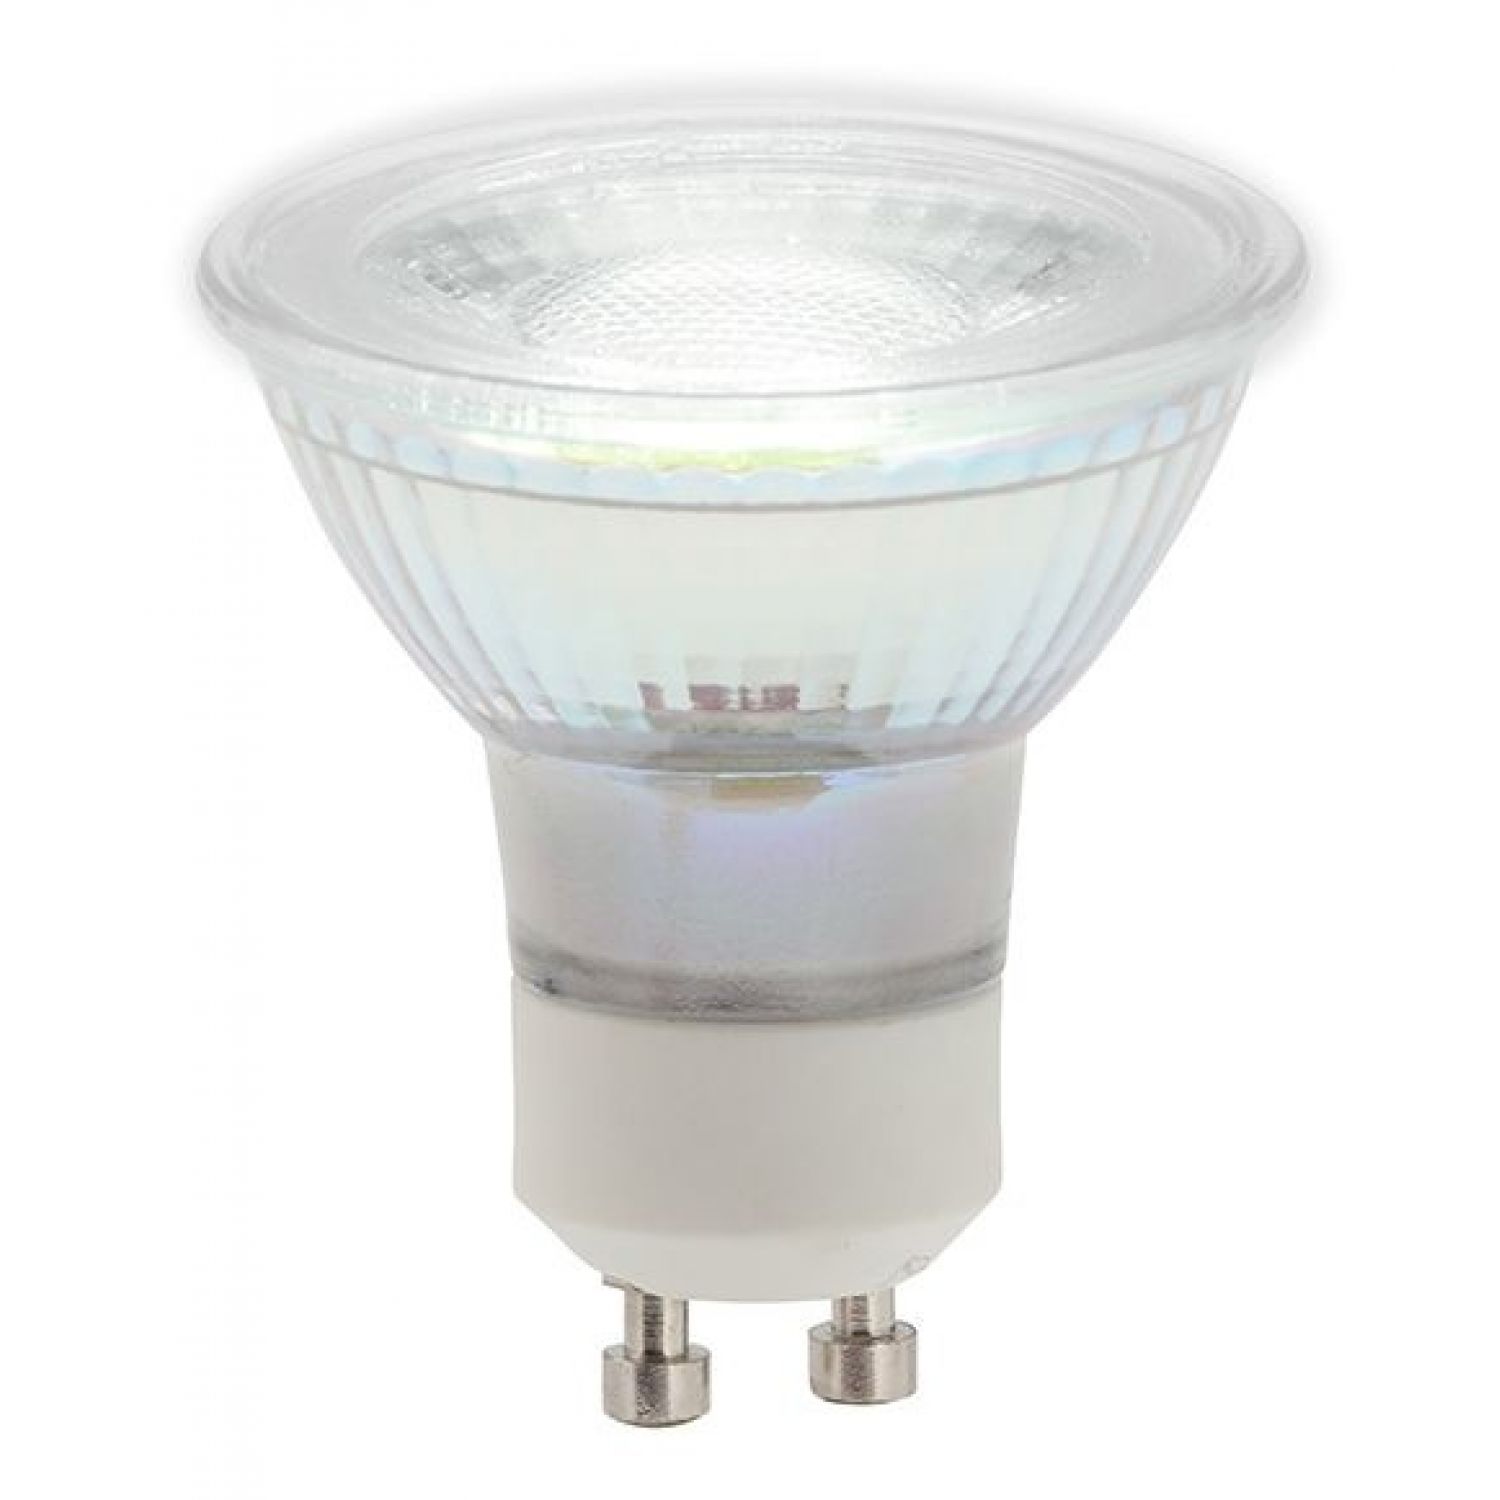 beam LED INL-34151-4K: 4000K, InLight - 5w from 320° 400lm, Bulb, GU10 dimmable, glass,